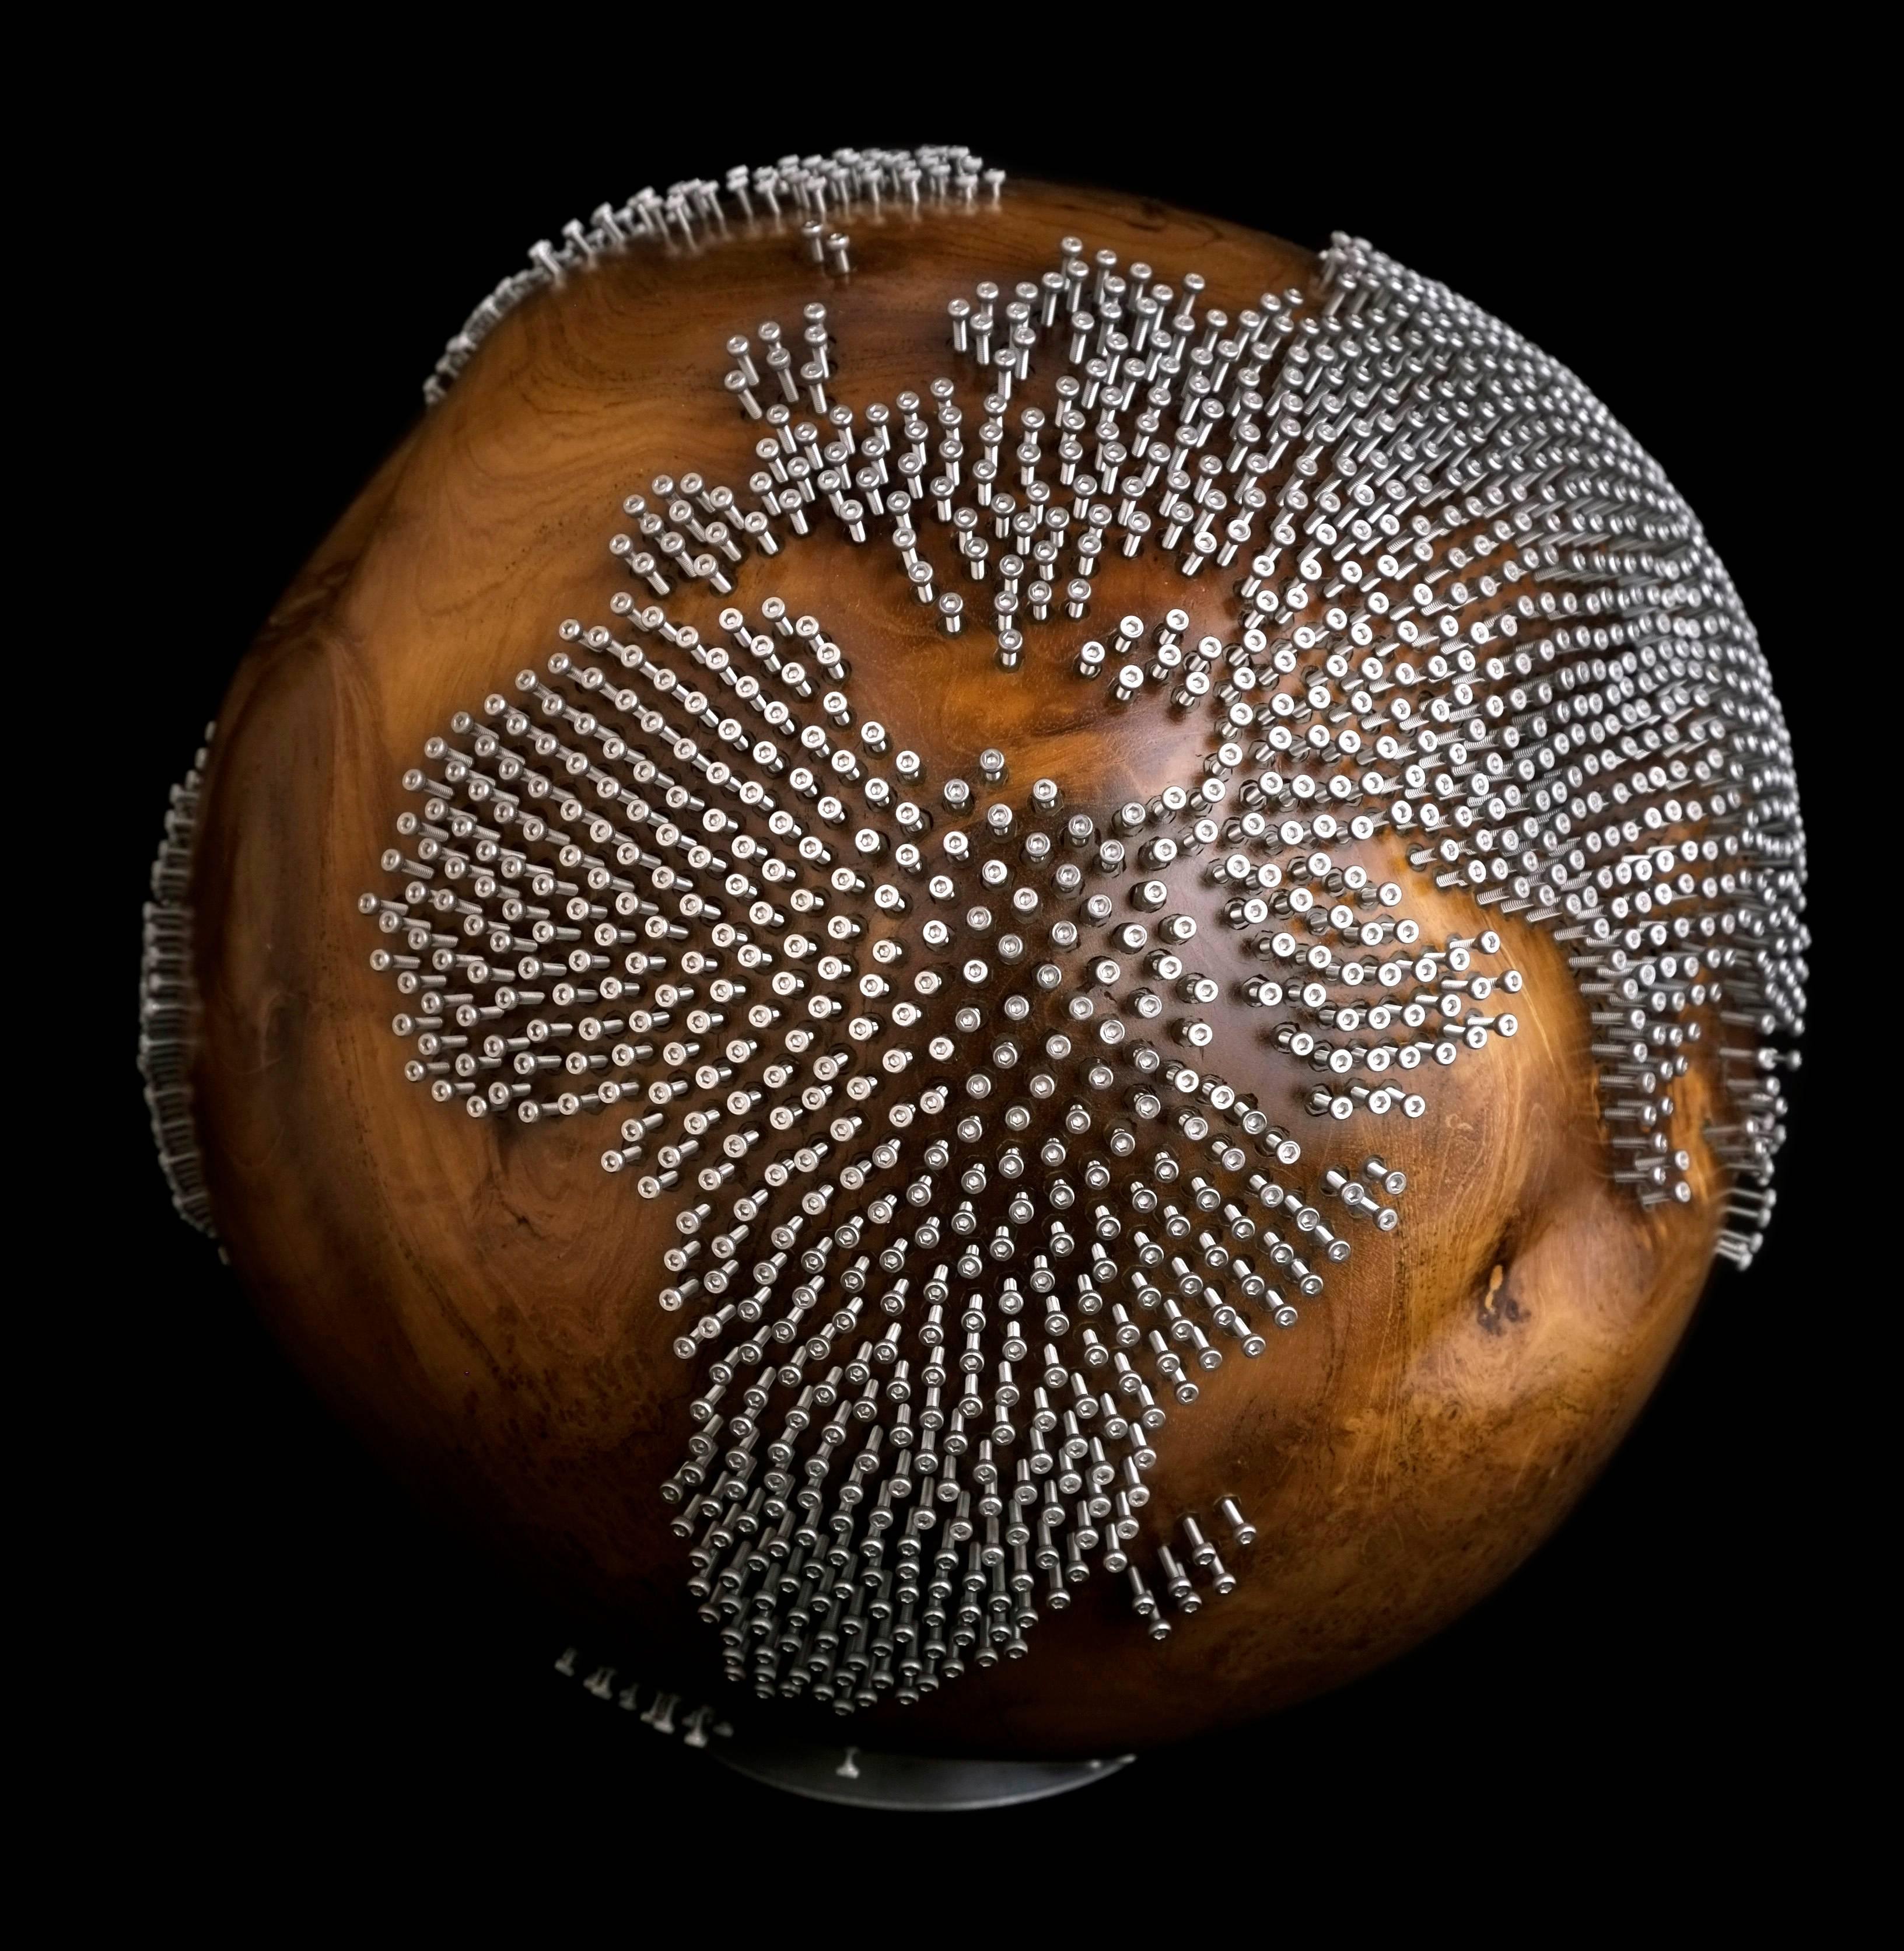 All weddings are similar, but every marriage is different.

Second edition of our unique handcrafted wooden globe, similar to our first, but many more differences; this piece has 2147 stainless steel bolts which are an interesting playable